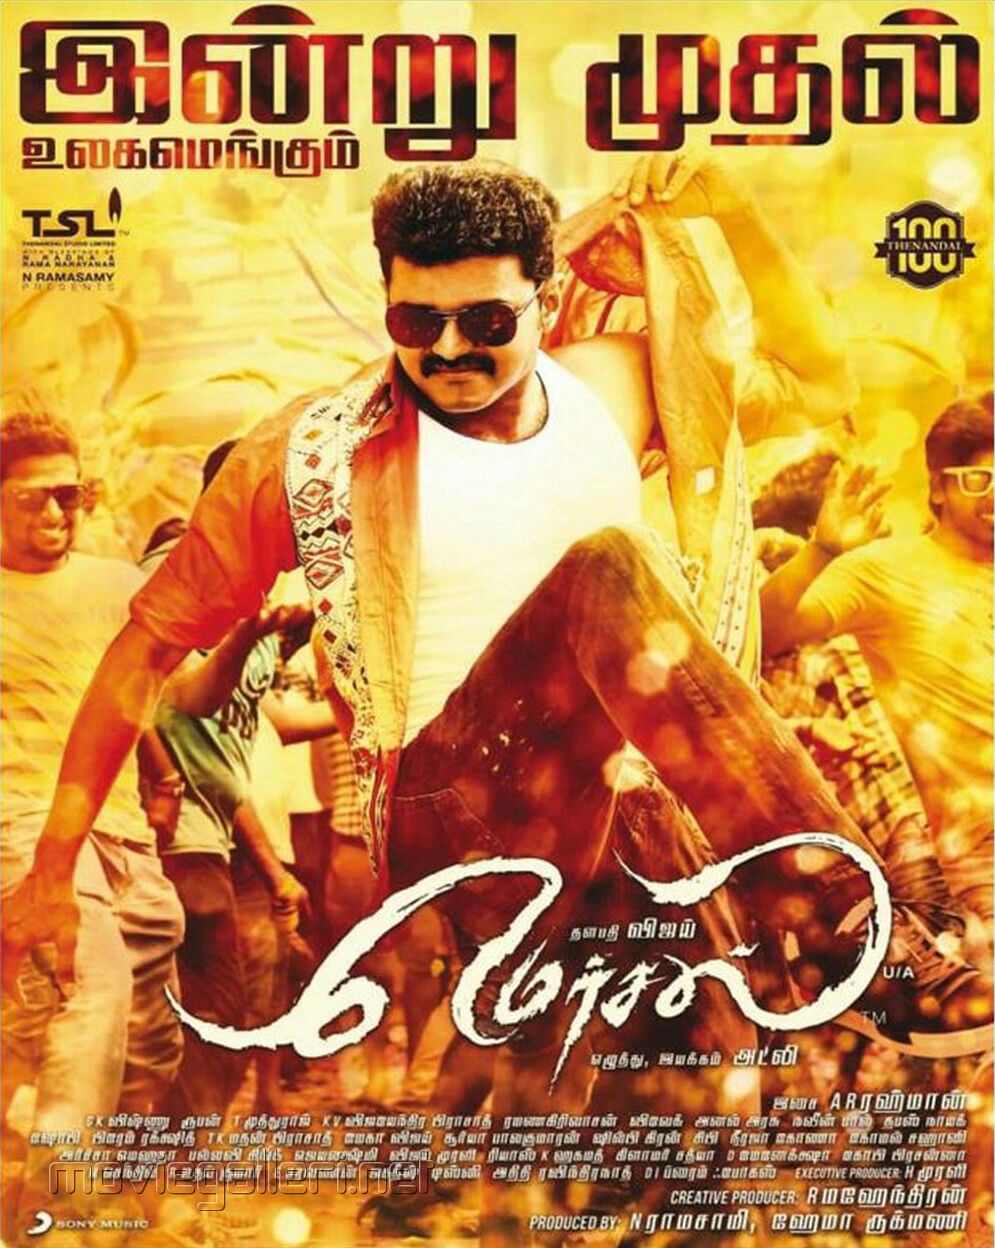 Mersal: A 2017 action film directed by Atlee, the film is about a police officer who arrests a doctor for crimes targeting medical professionals but later finds the real culprit in a tale of revenge, corruption and magic.